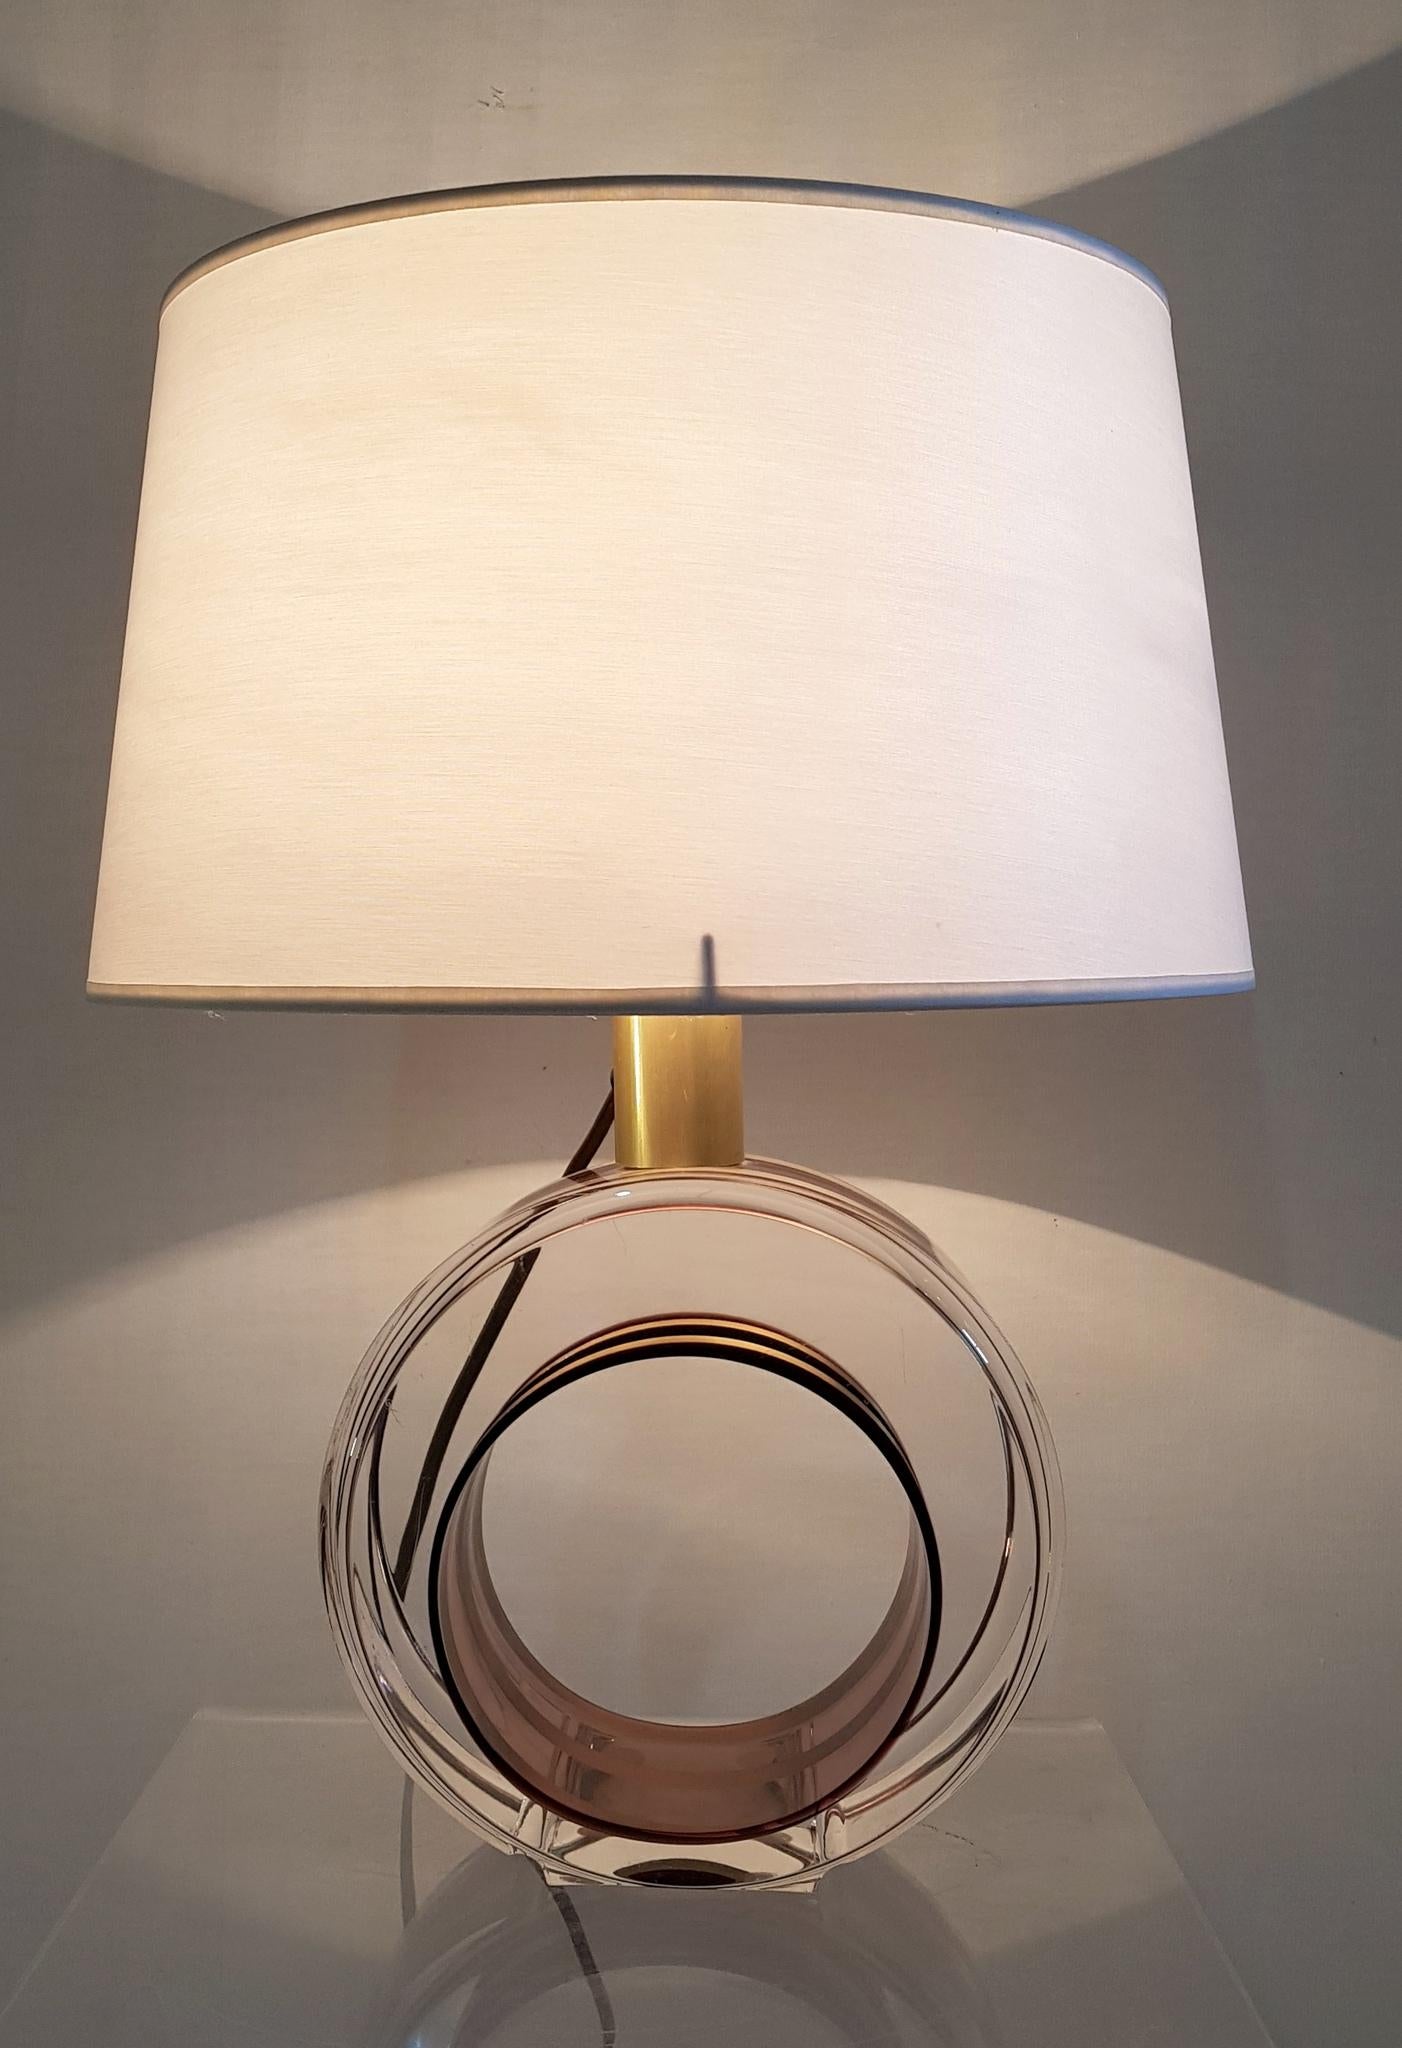 A table lamp with round base in Lucite with a swirl design inside in gold colored aluminium. The color of the base changes a bit with the light but is somewhat purple/amber colored. Comes with a lampshade in white cotton.